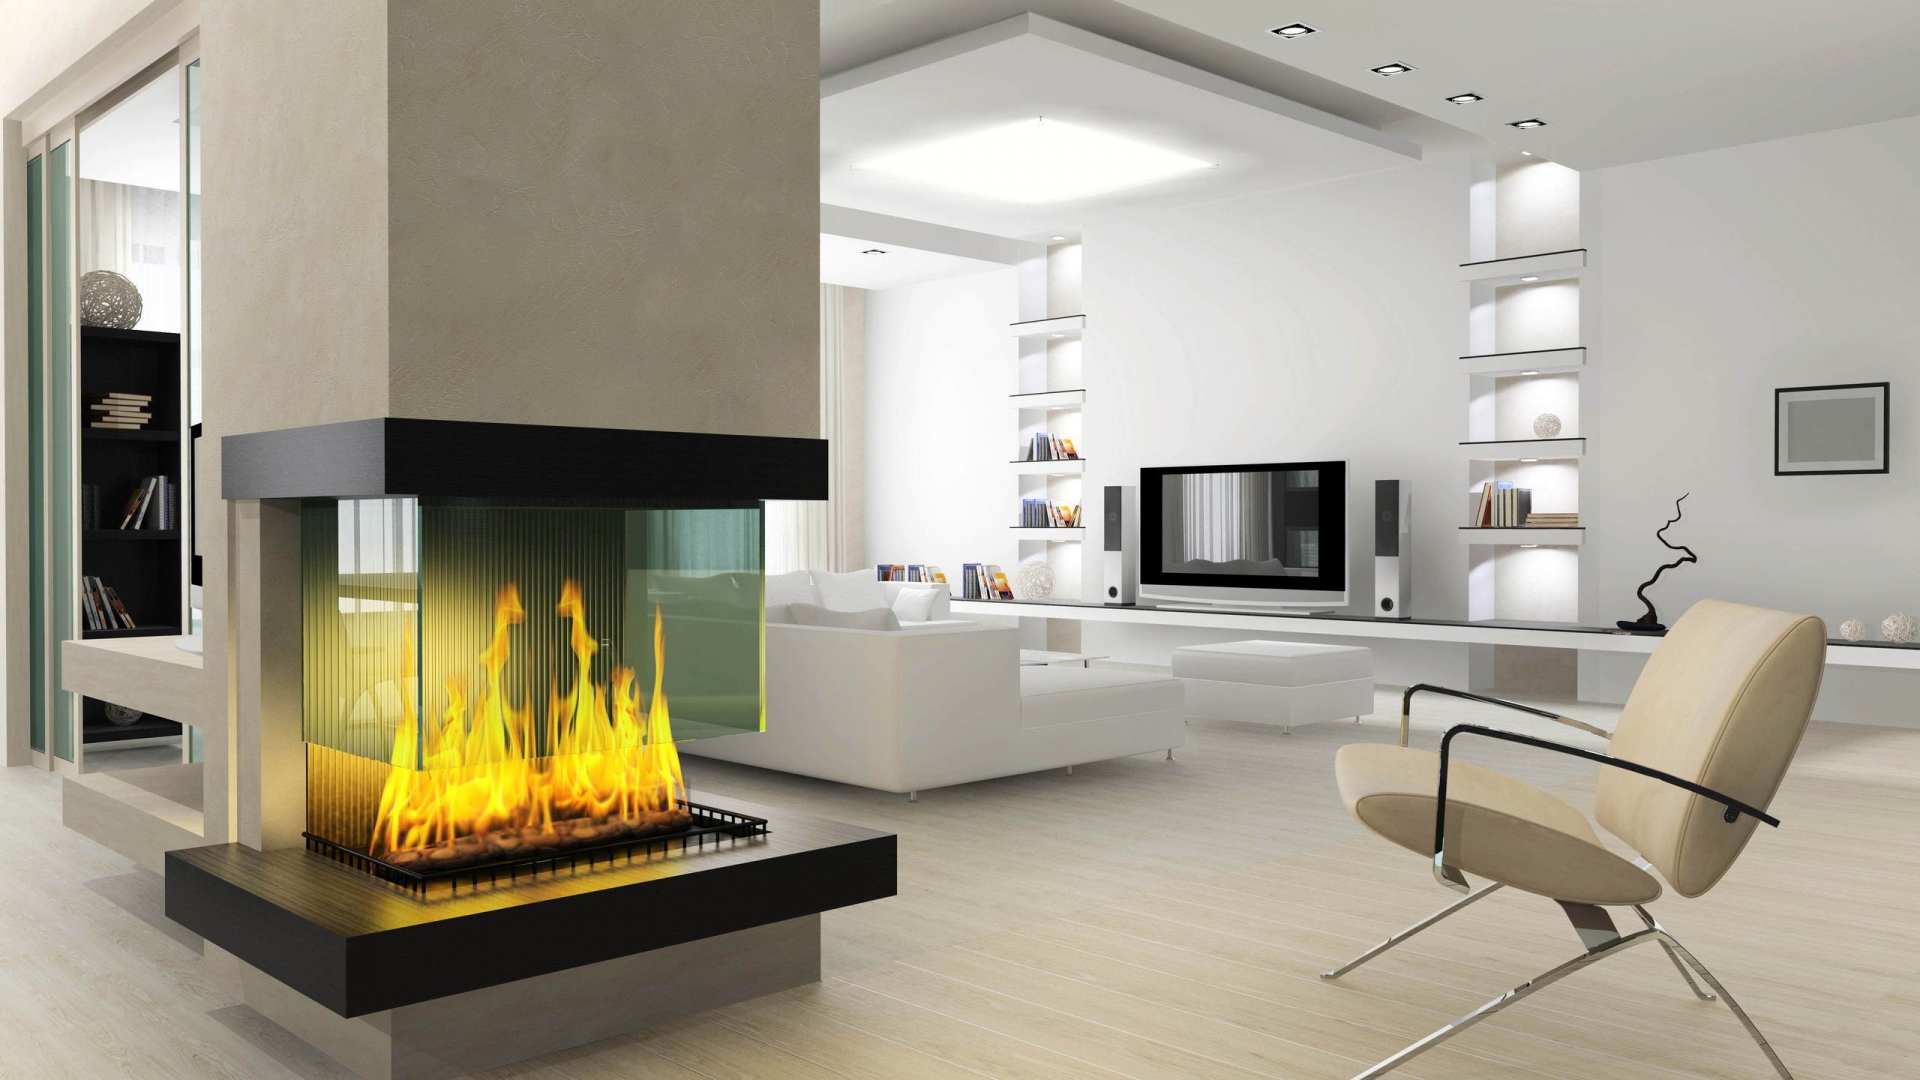 Fireplace for 1920 x 1080 HDTV 1080p resolution